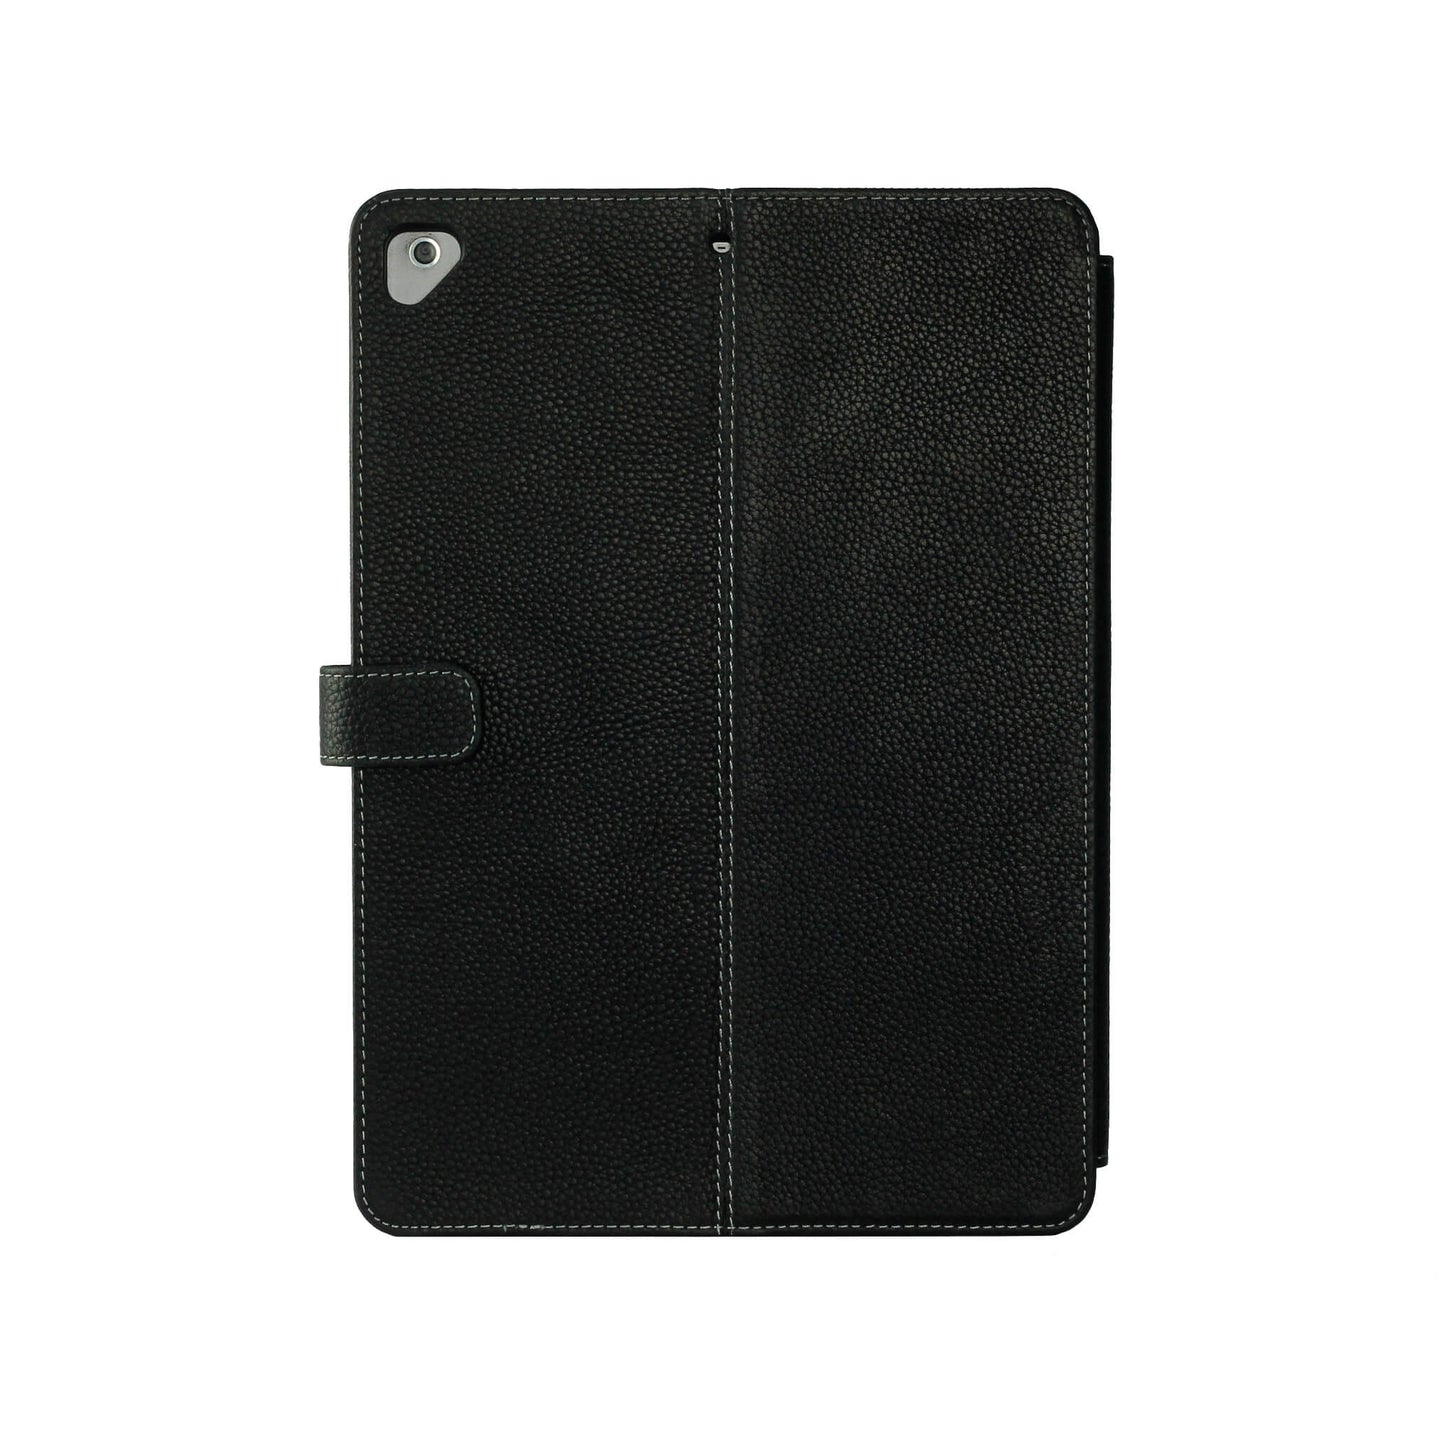 ONSALA COLLECTION Tablet Cover Læder 9,7" iPad Air/Air2/Pro Sort